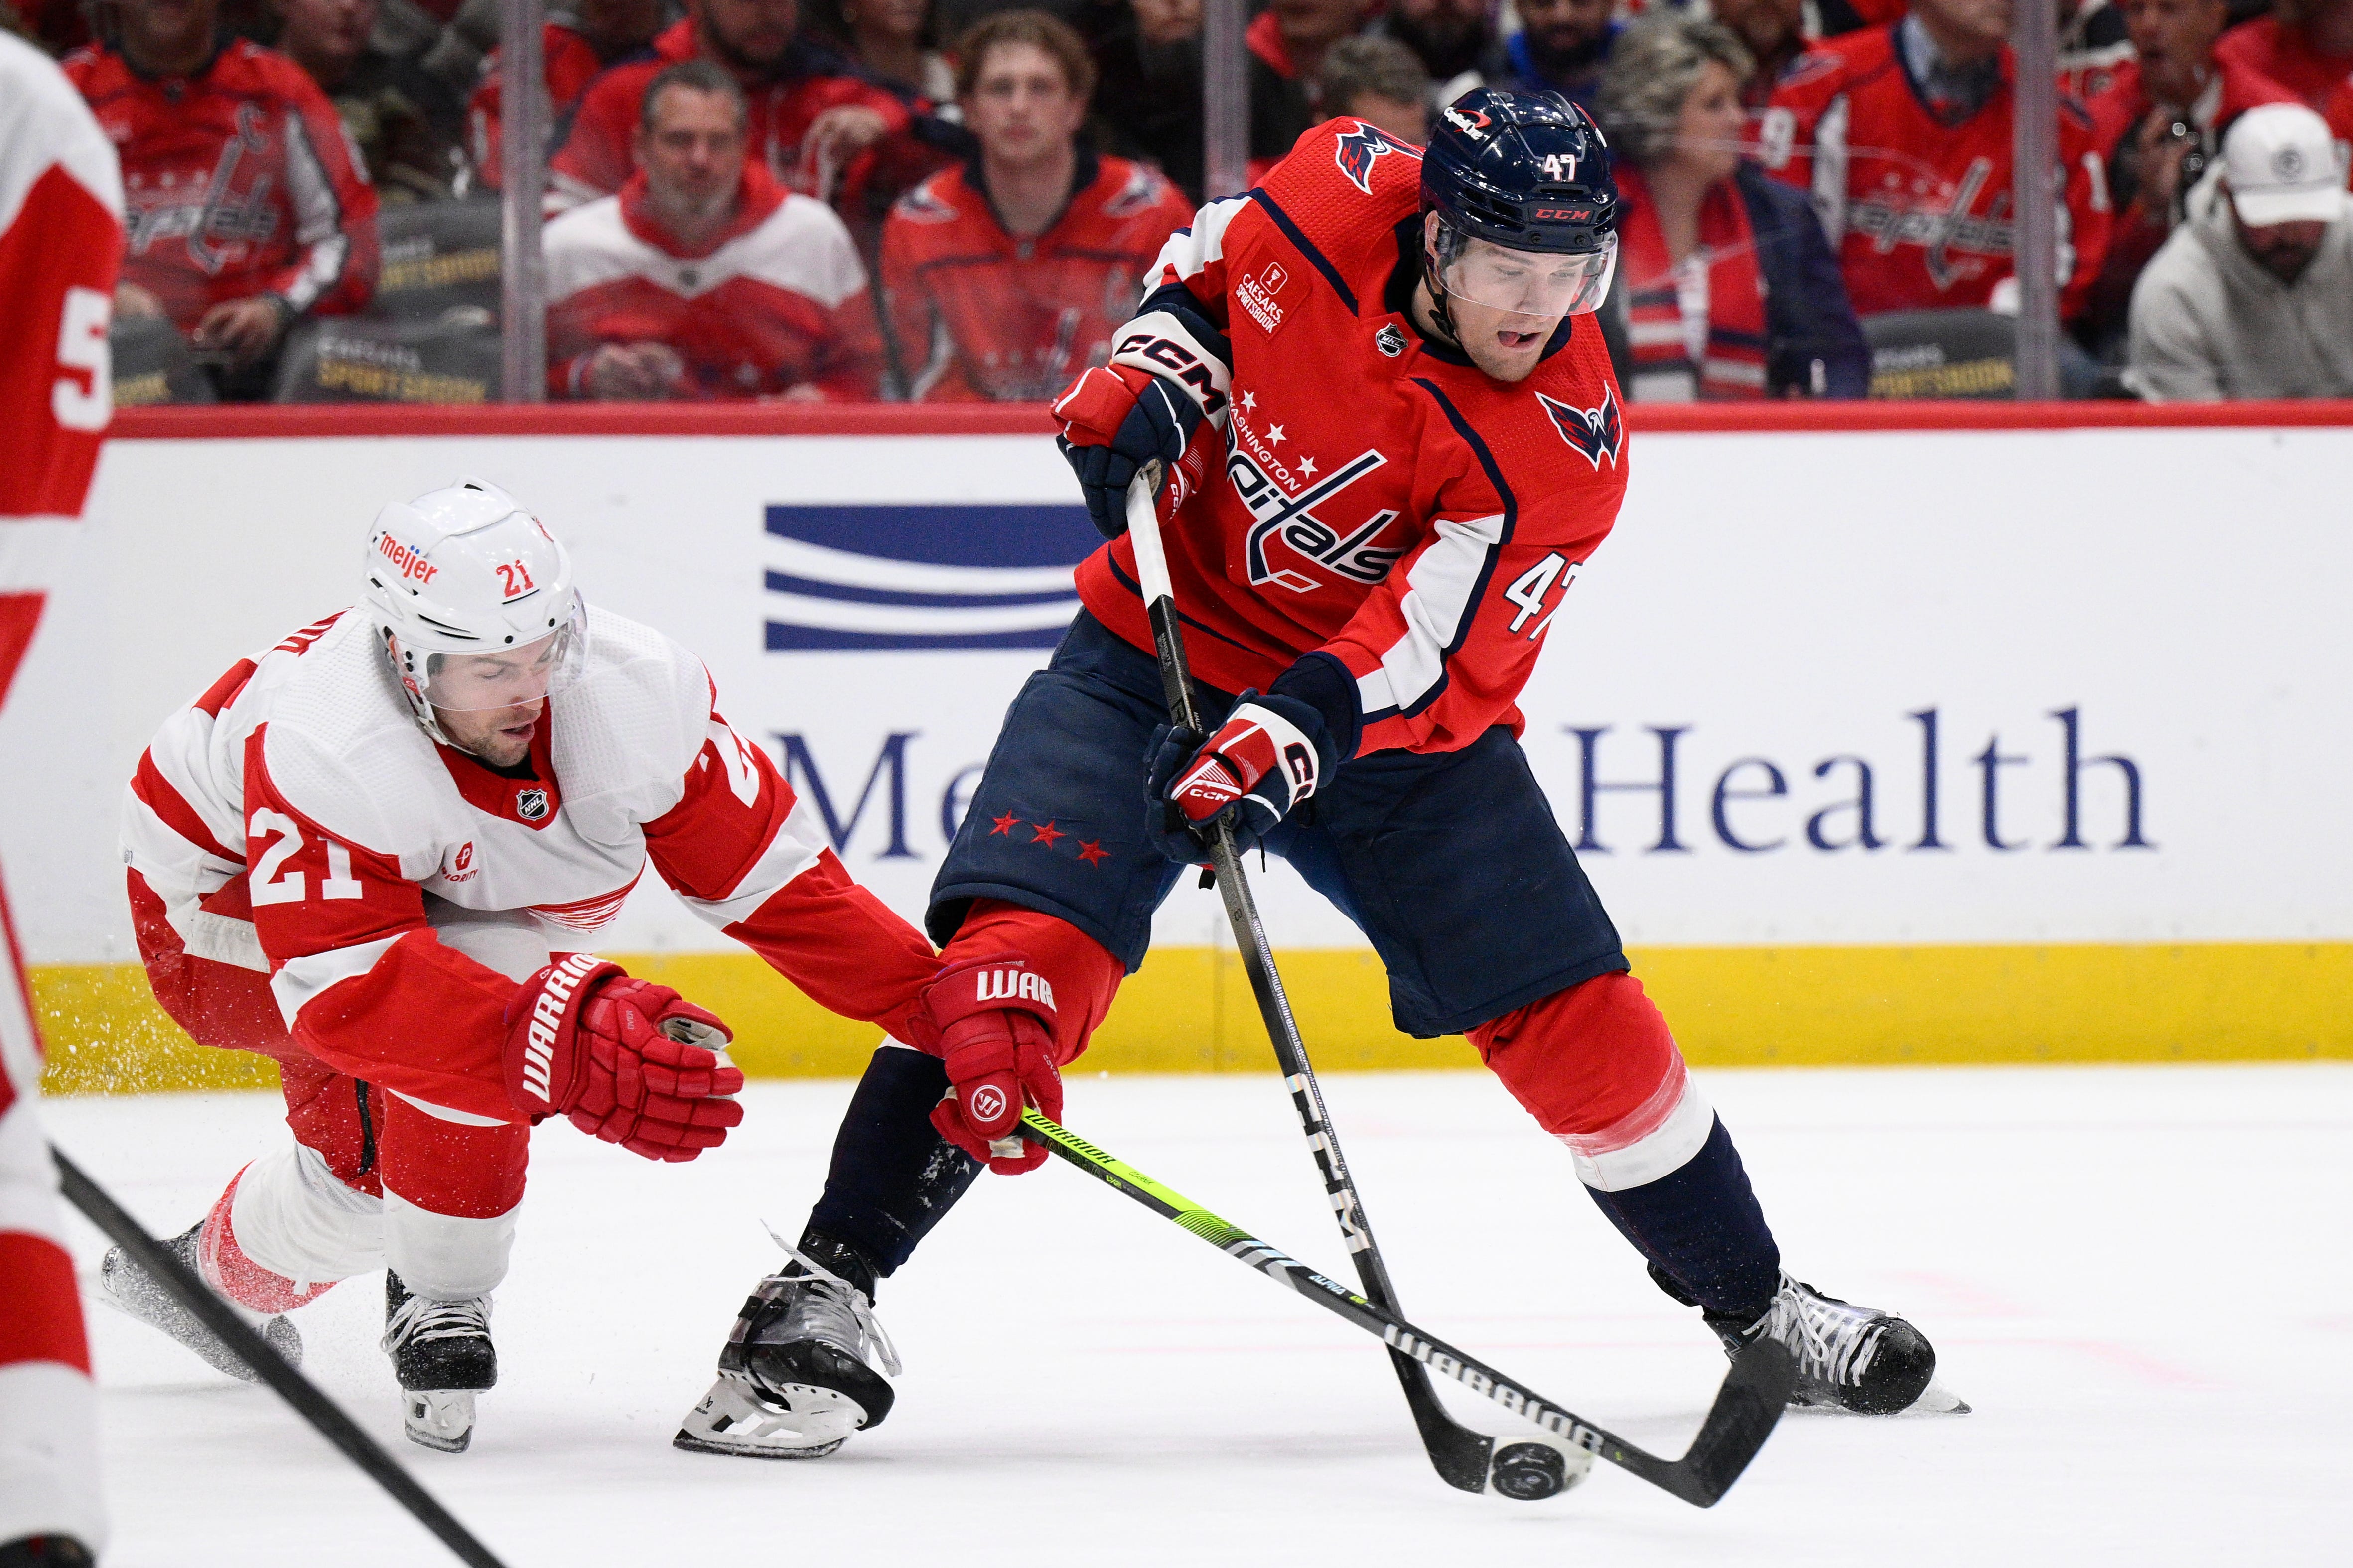 Washington Capitals left wing Beck Malenstyn (47) skates with the puck against Detroit Red Wings center Austin Czarnik (21)during the first period.